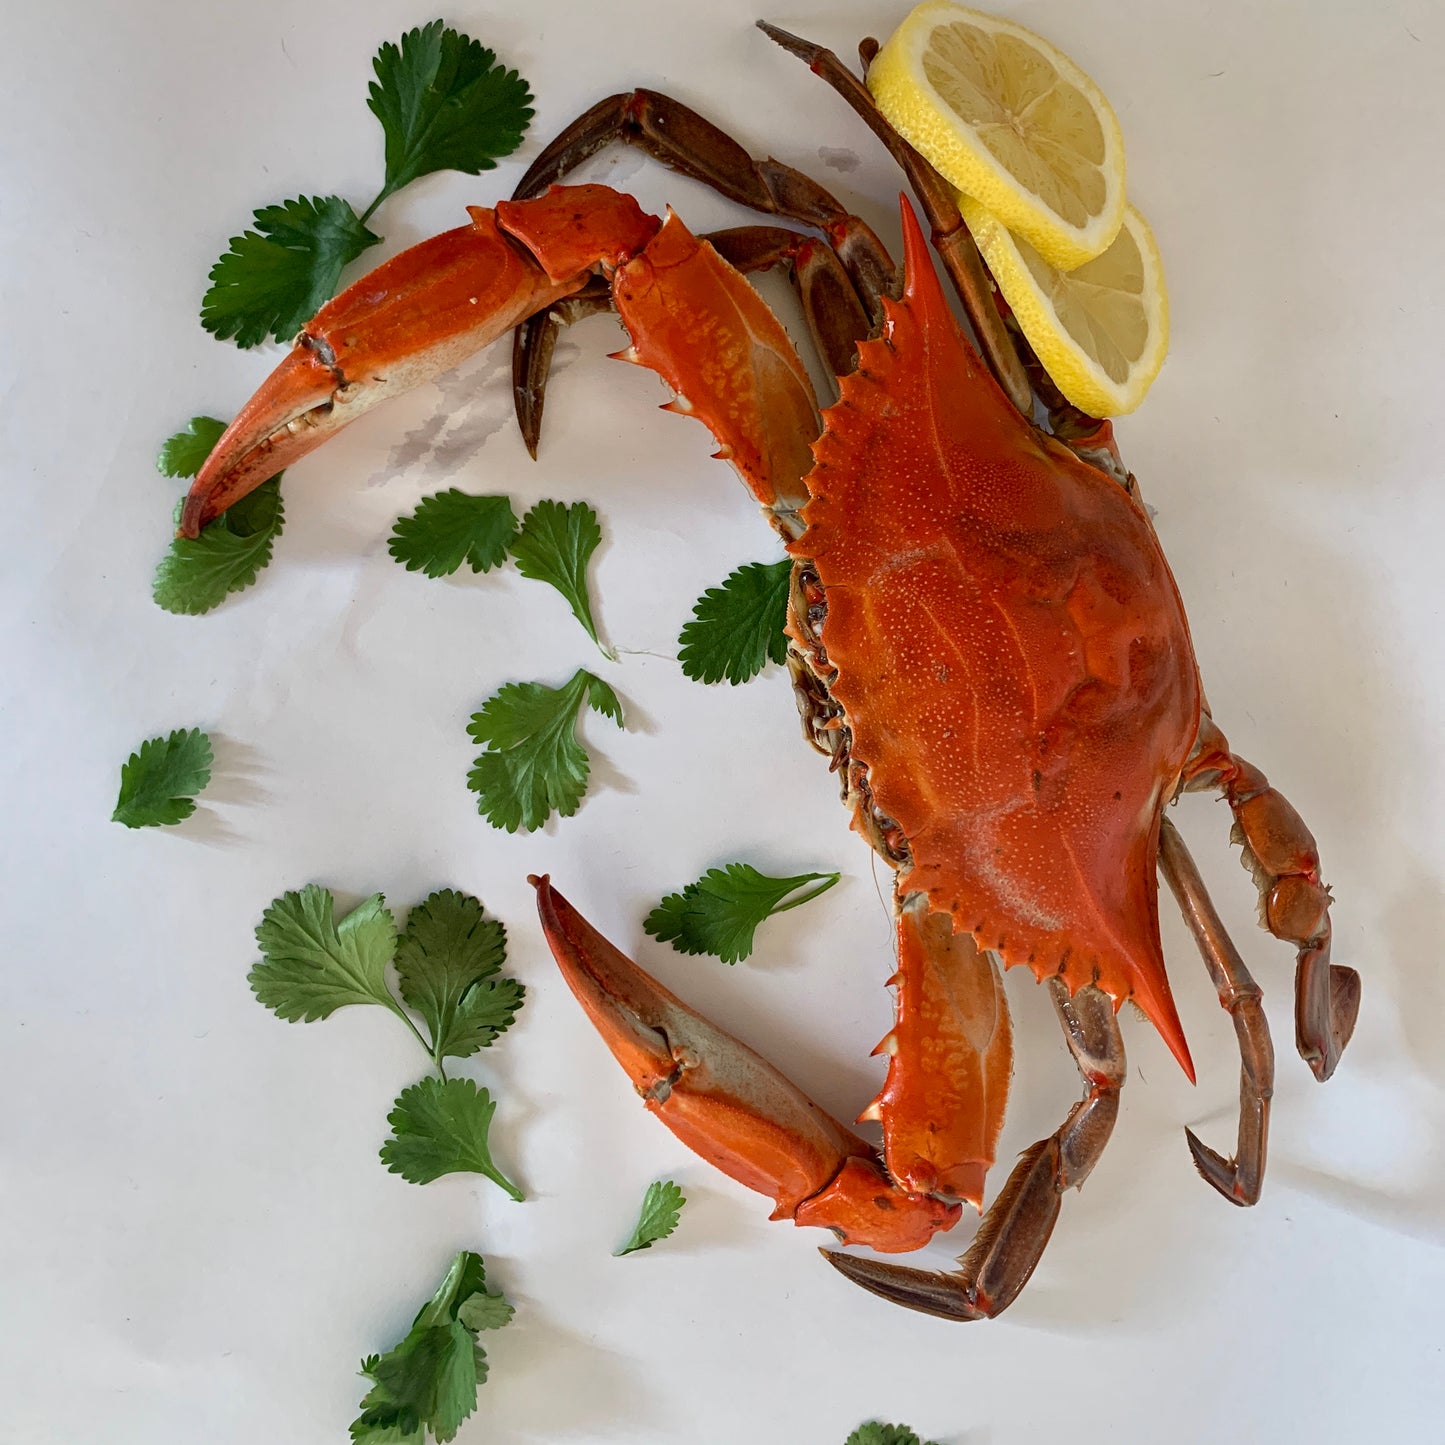 Crabbylicious: Why Eating Crab is Worth the Hassle